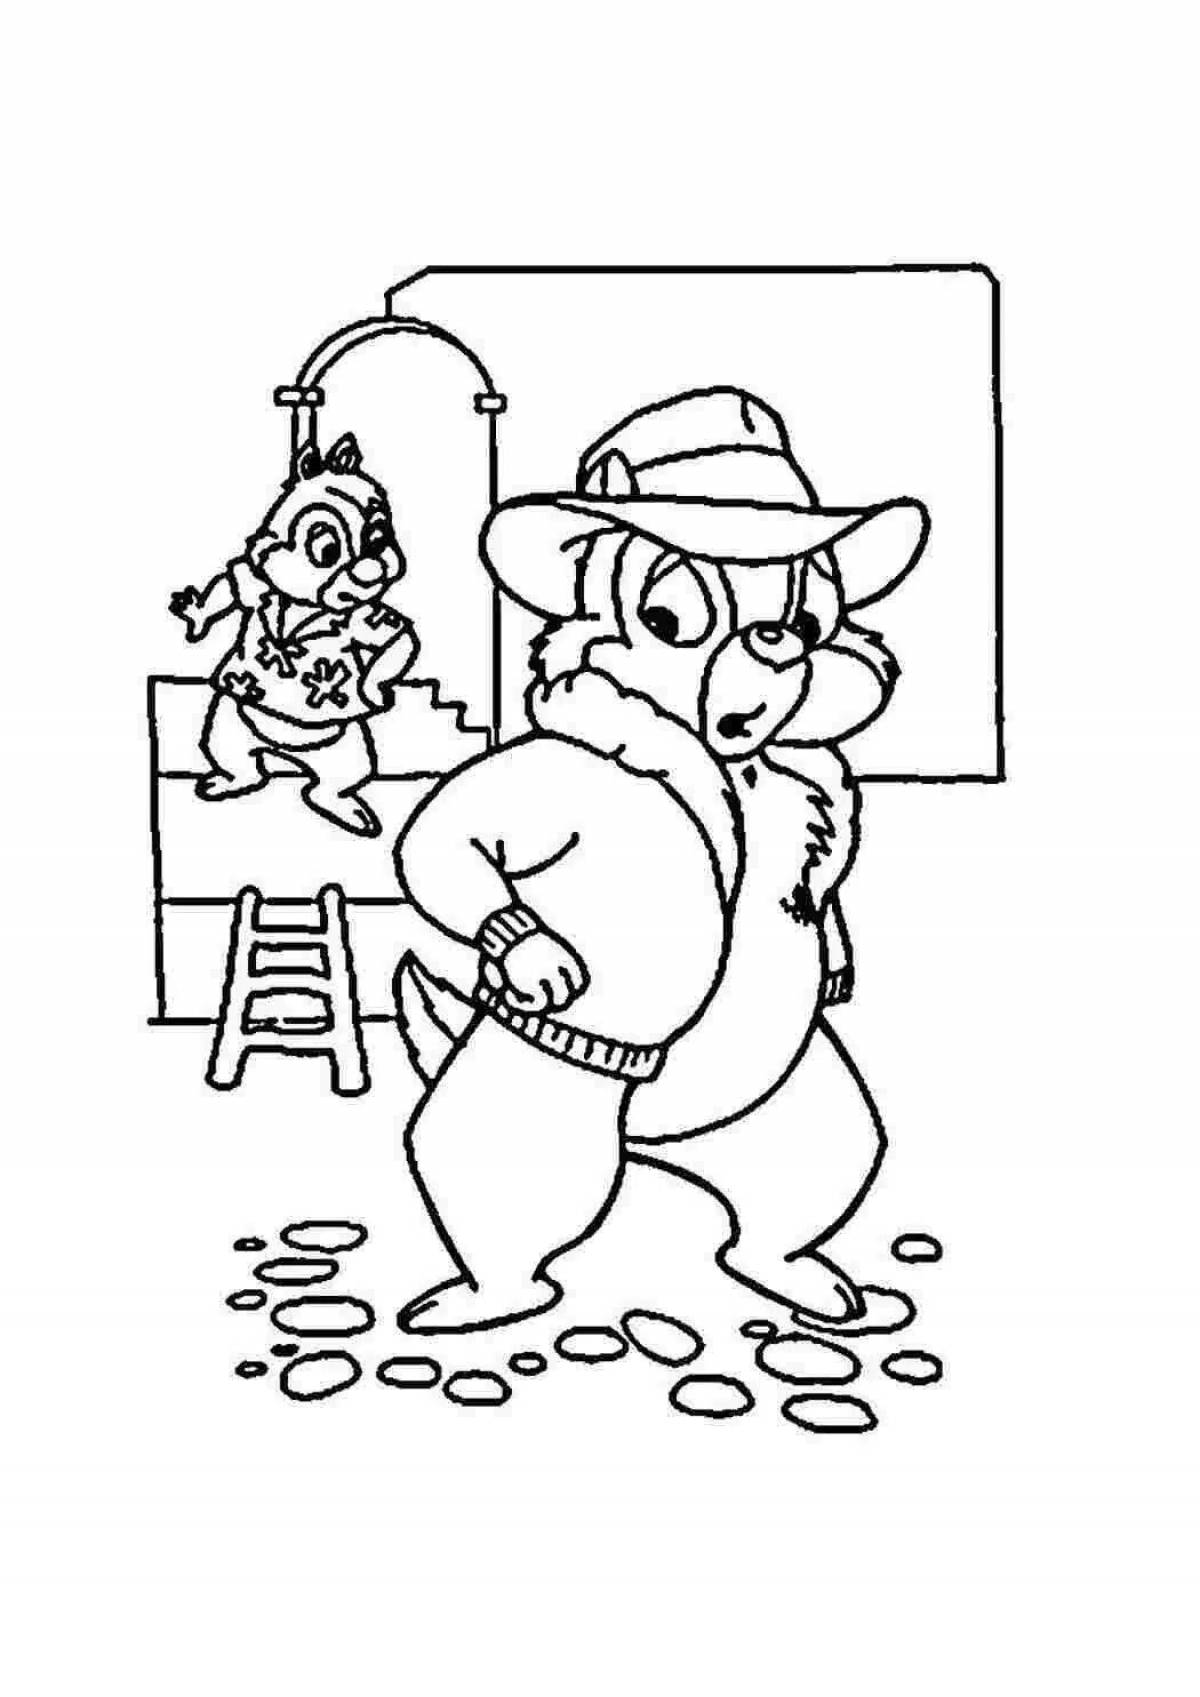 Fun chip 'n dale rescue rangers coloring page